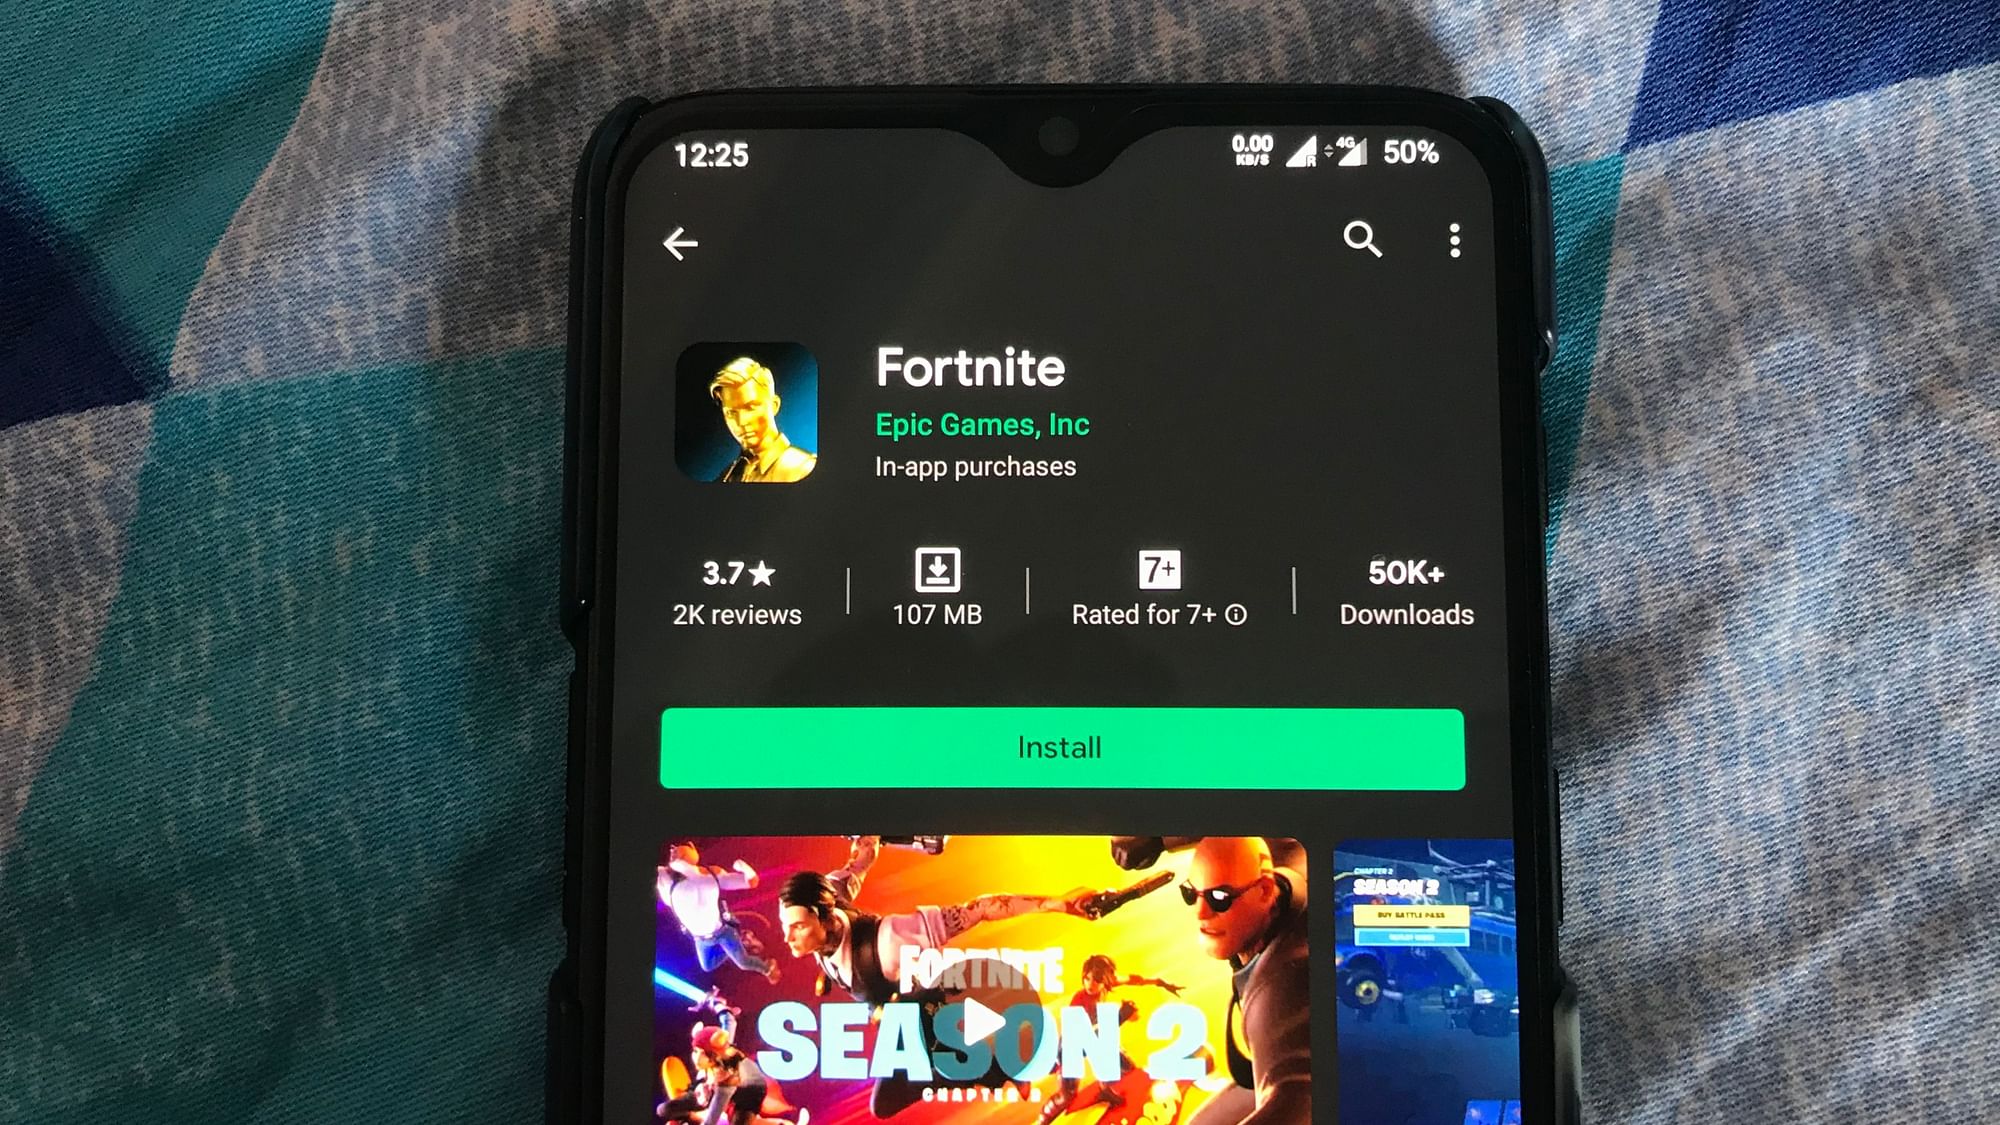 Fortnite Mobile on Android Might Not Be Available in the Google Play Store